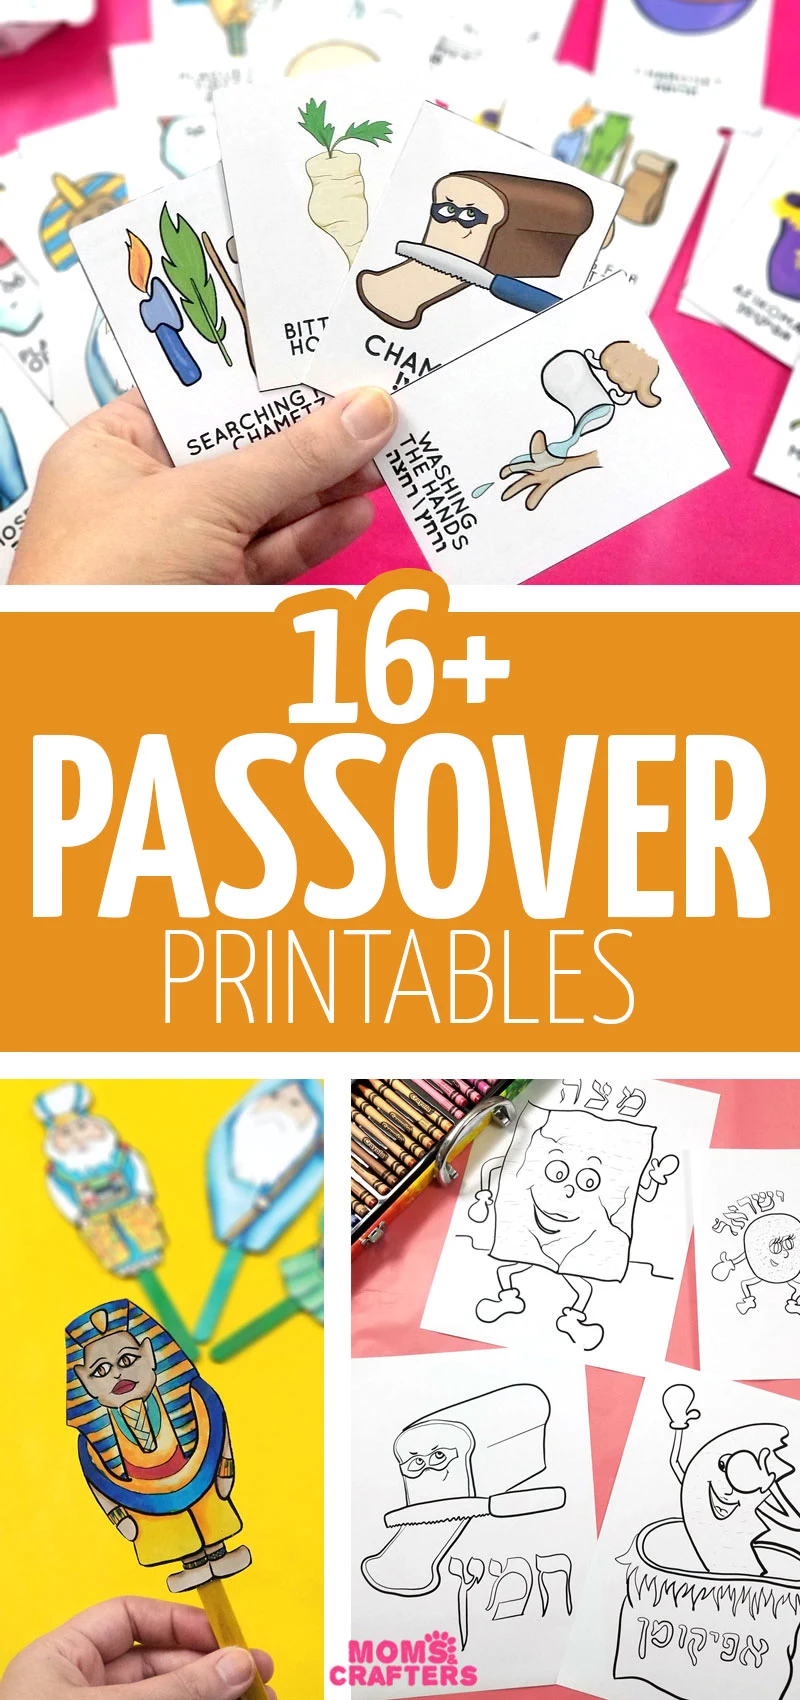 Click for over 16 cool Passover printables - including table decorations, kids activities crafts and coloring pages, Pesach makkot and ten plagues puppets, and more!